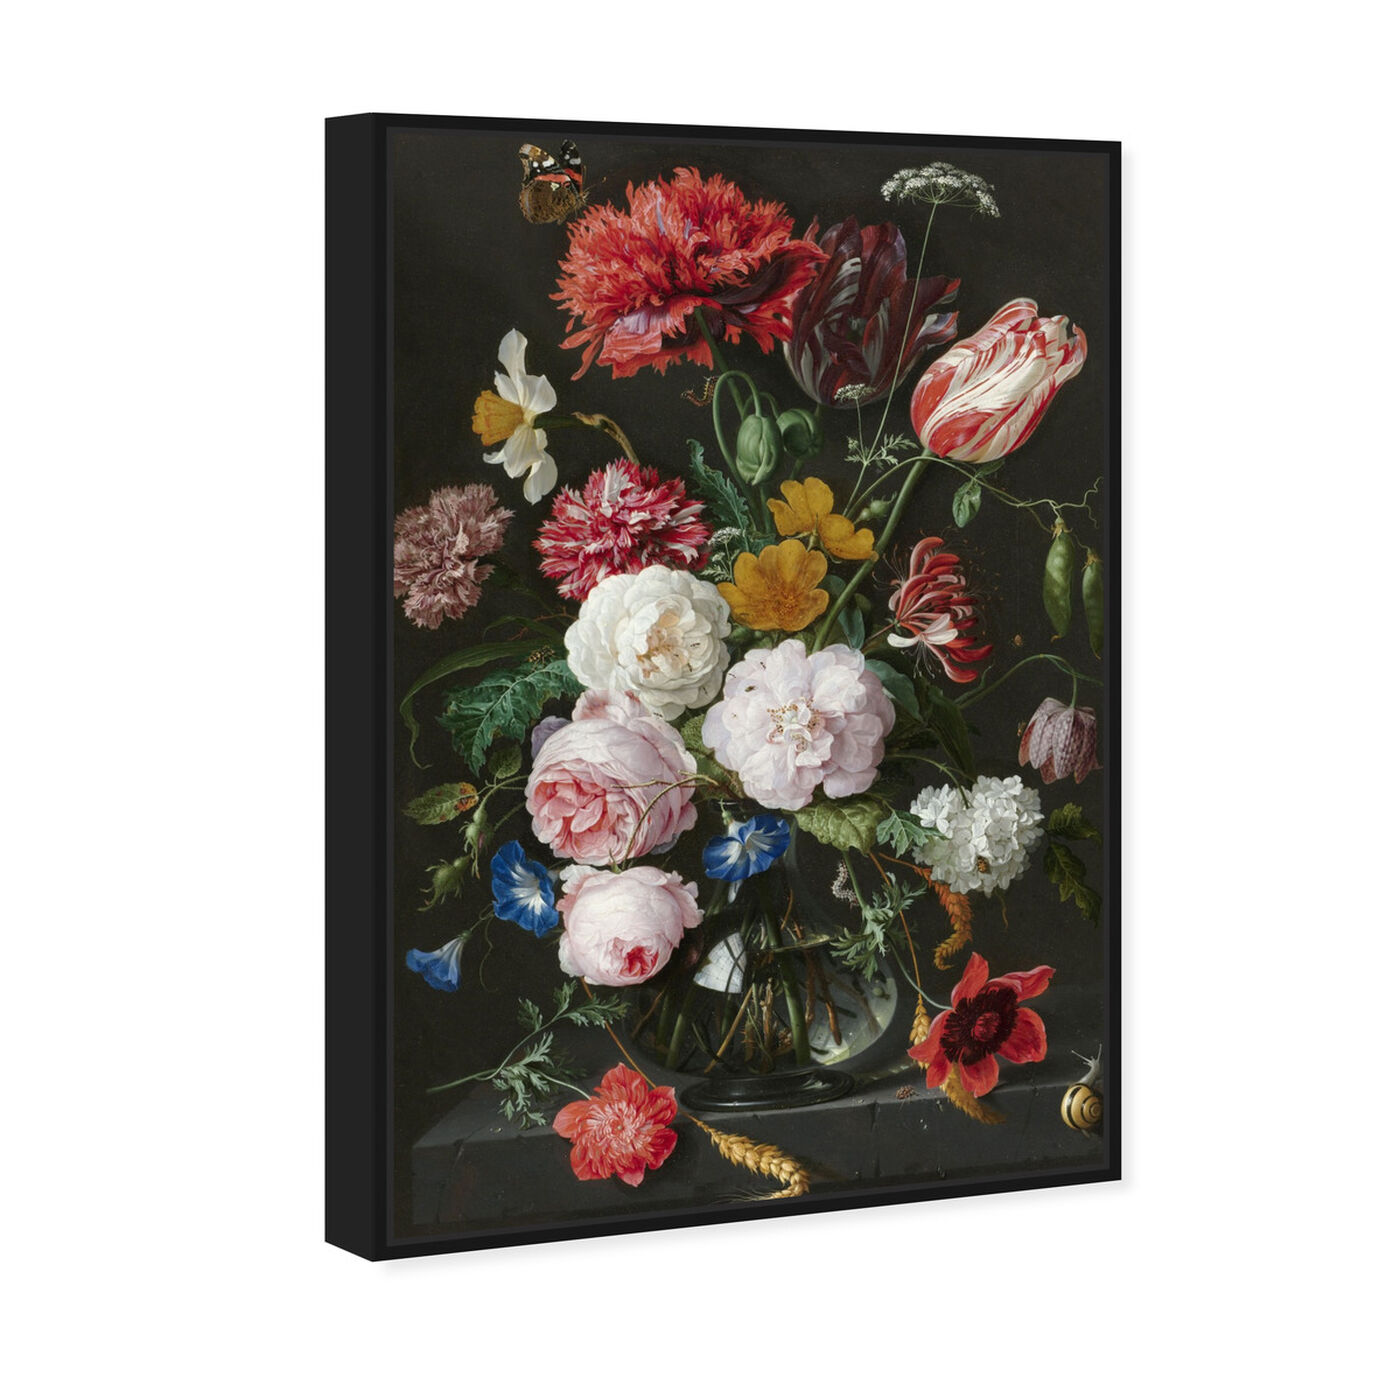 Angled view of Flower Arrangement XIV - The Art Cabinet featuring floral and botanical and florals art.